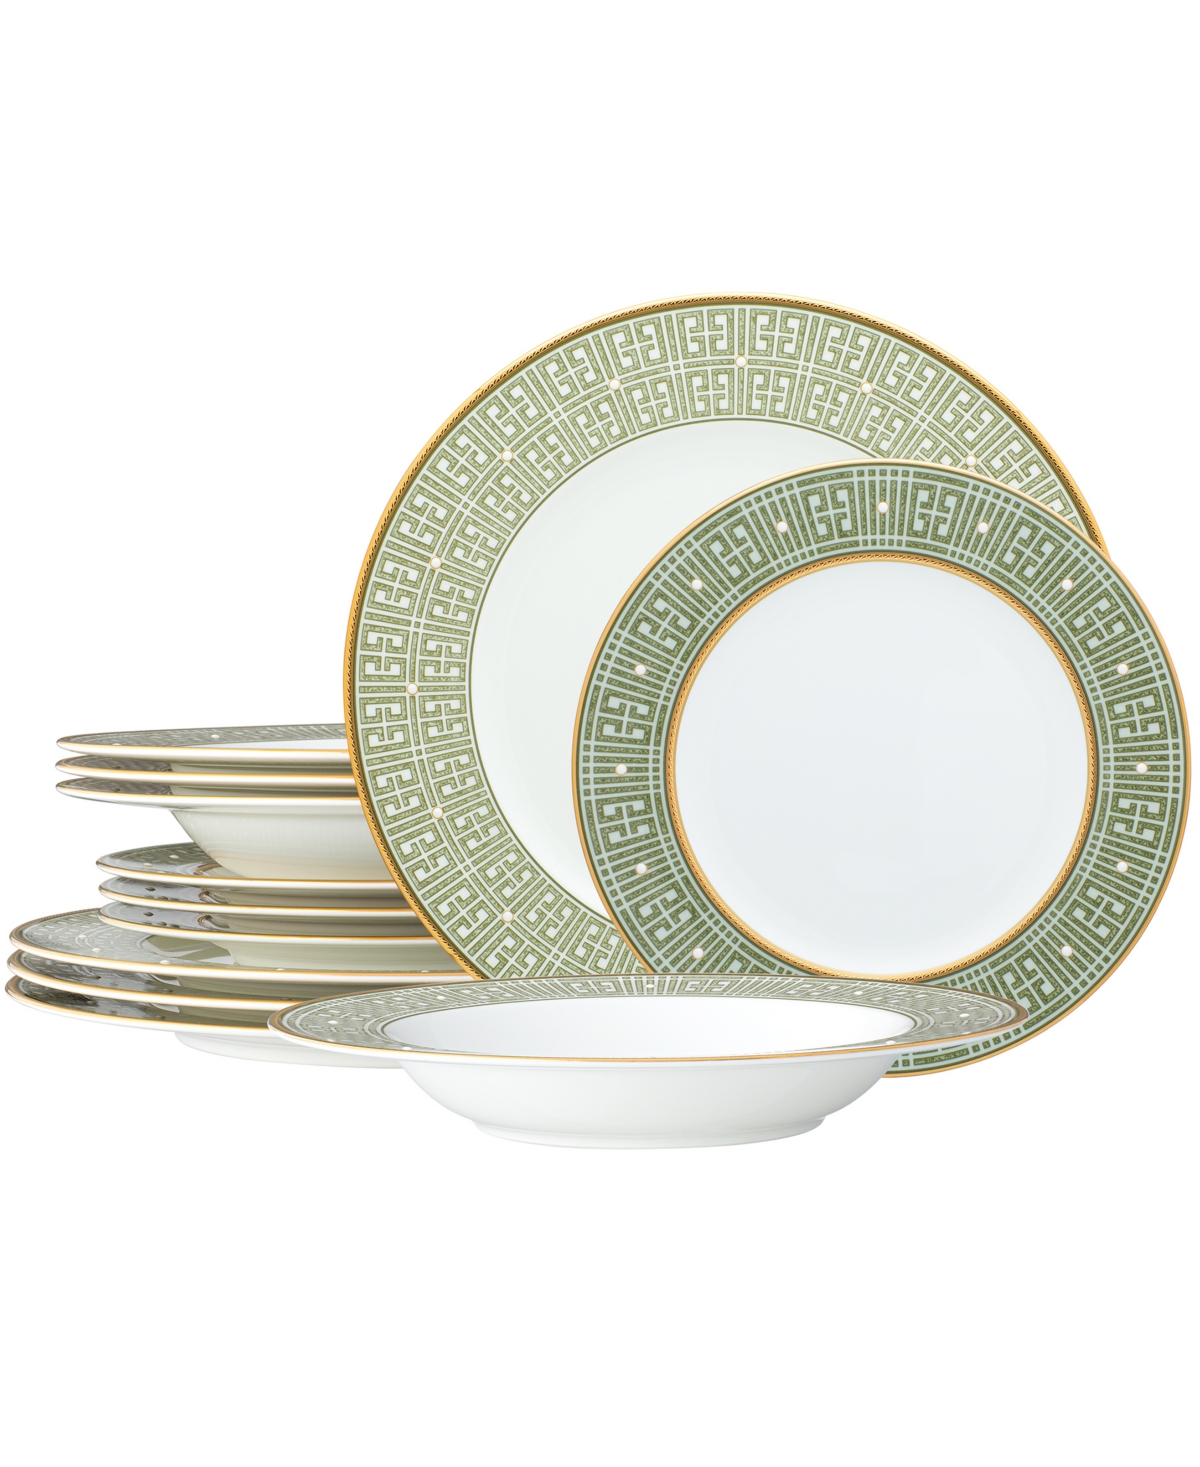 Noritake Infinity 12 Piece Set, Service For 4 In Green Gold